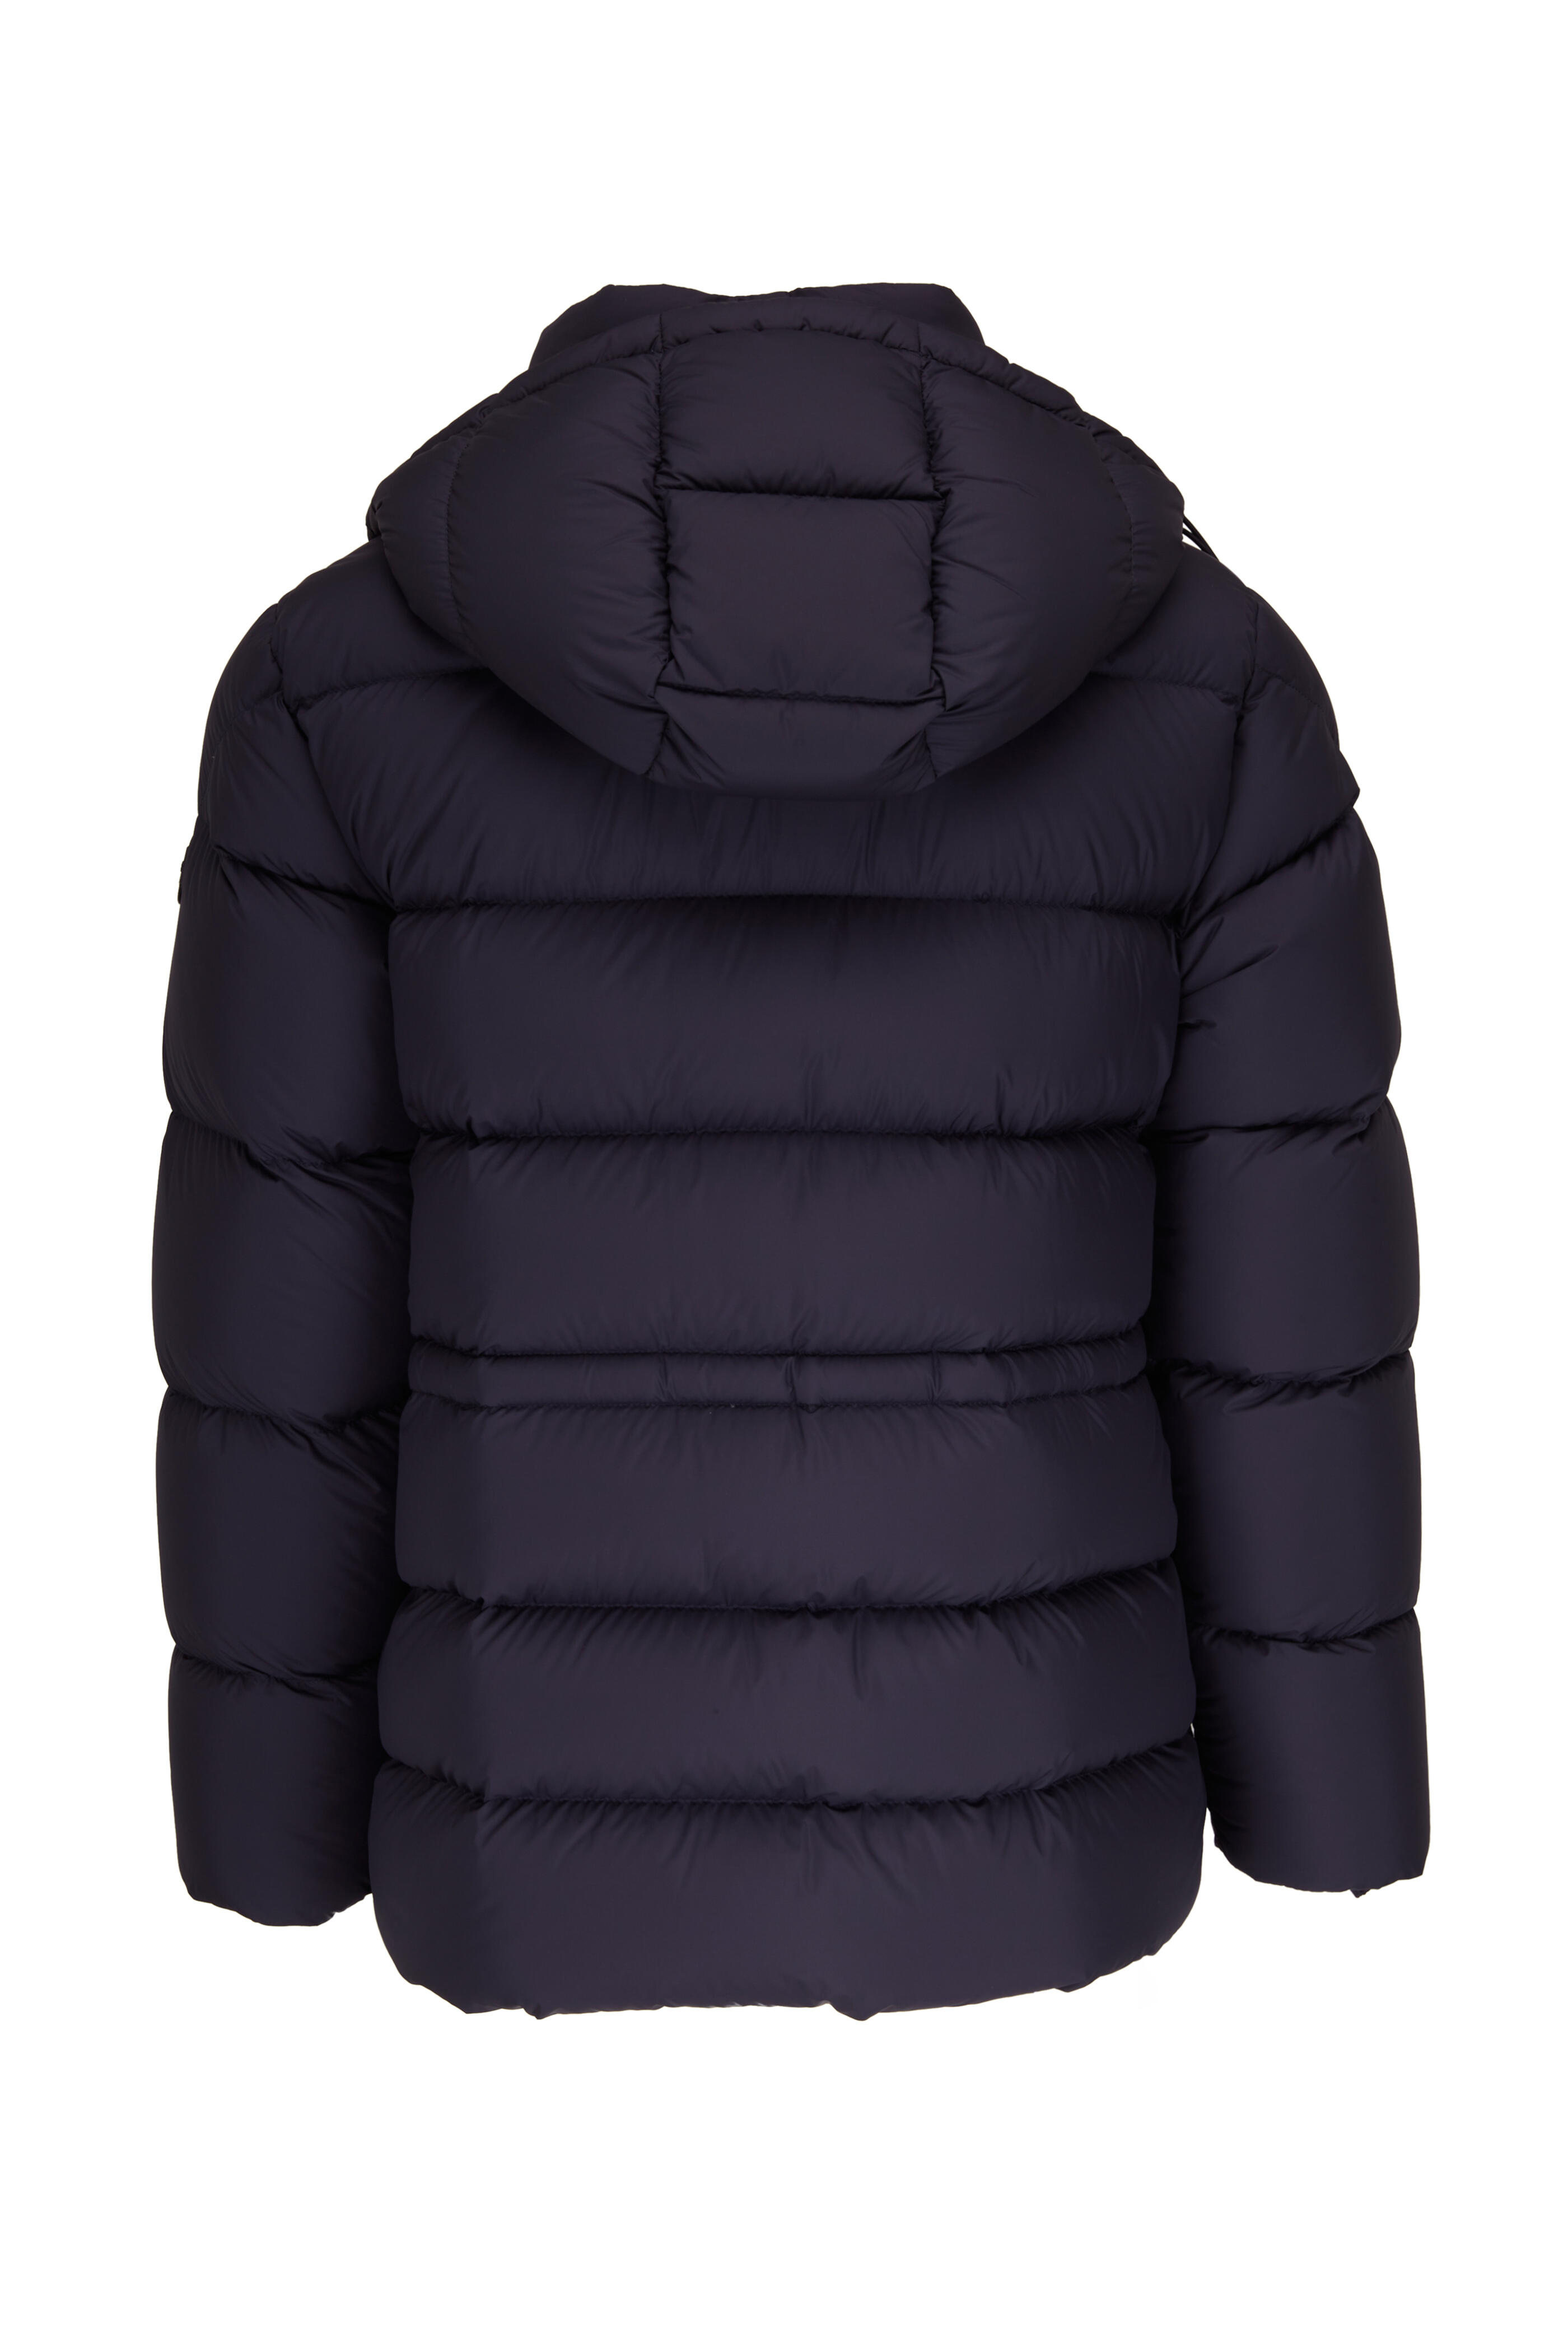 Moncler - Navy Short Down Parka | Mitchell Stores